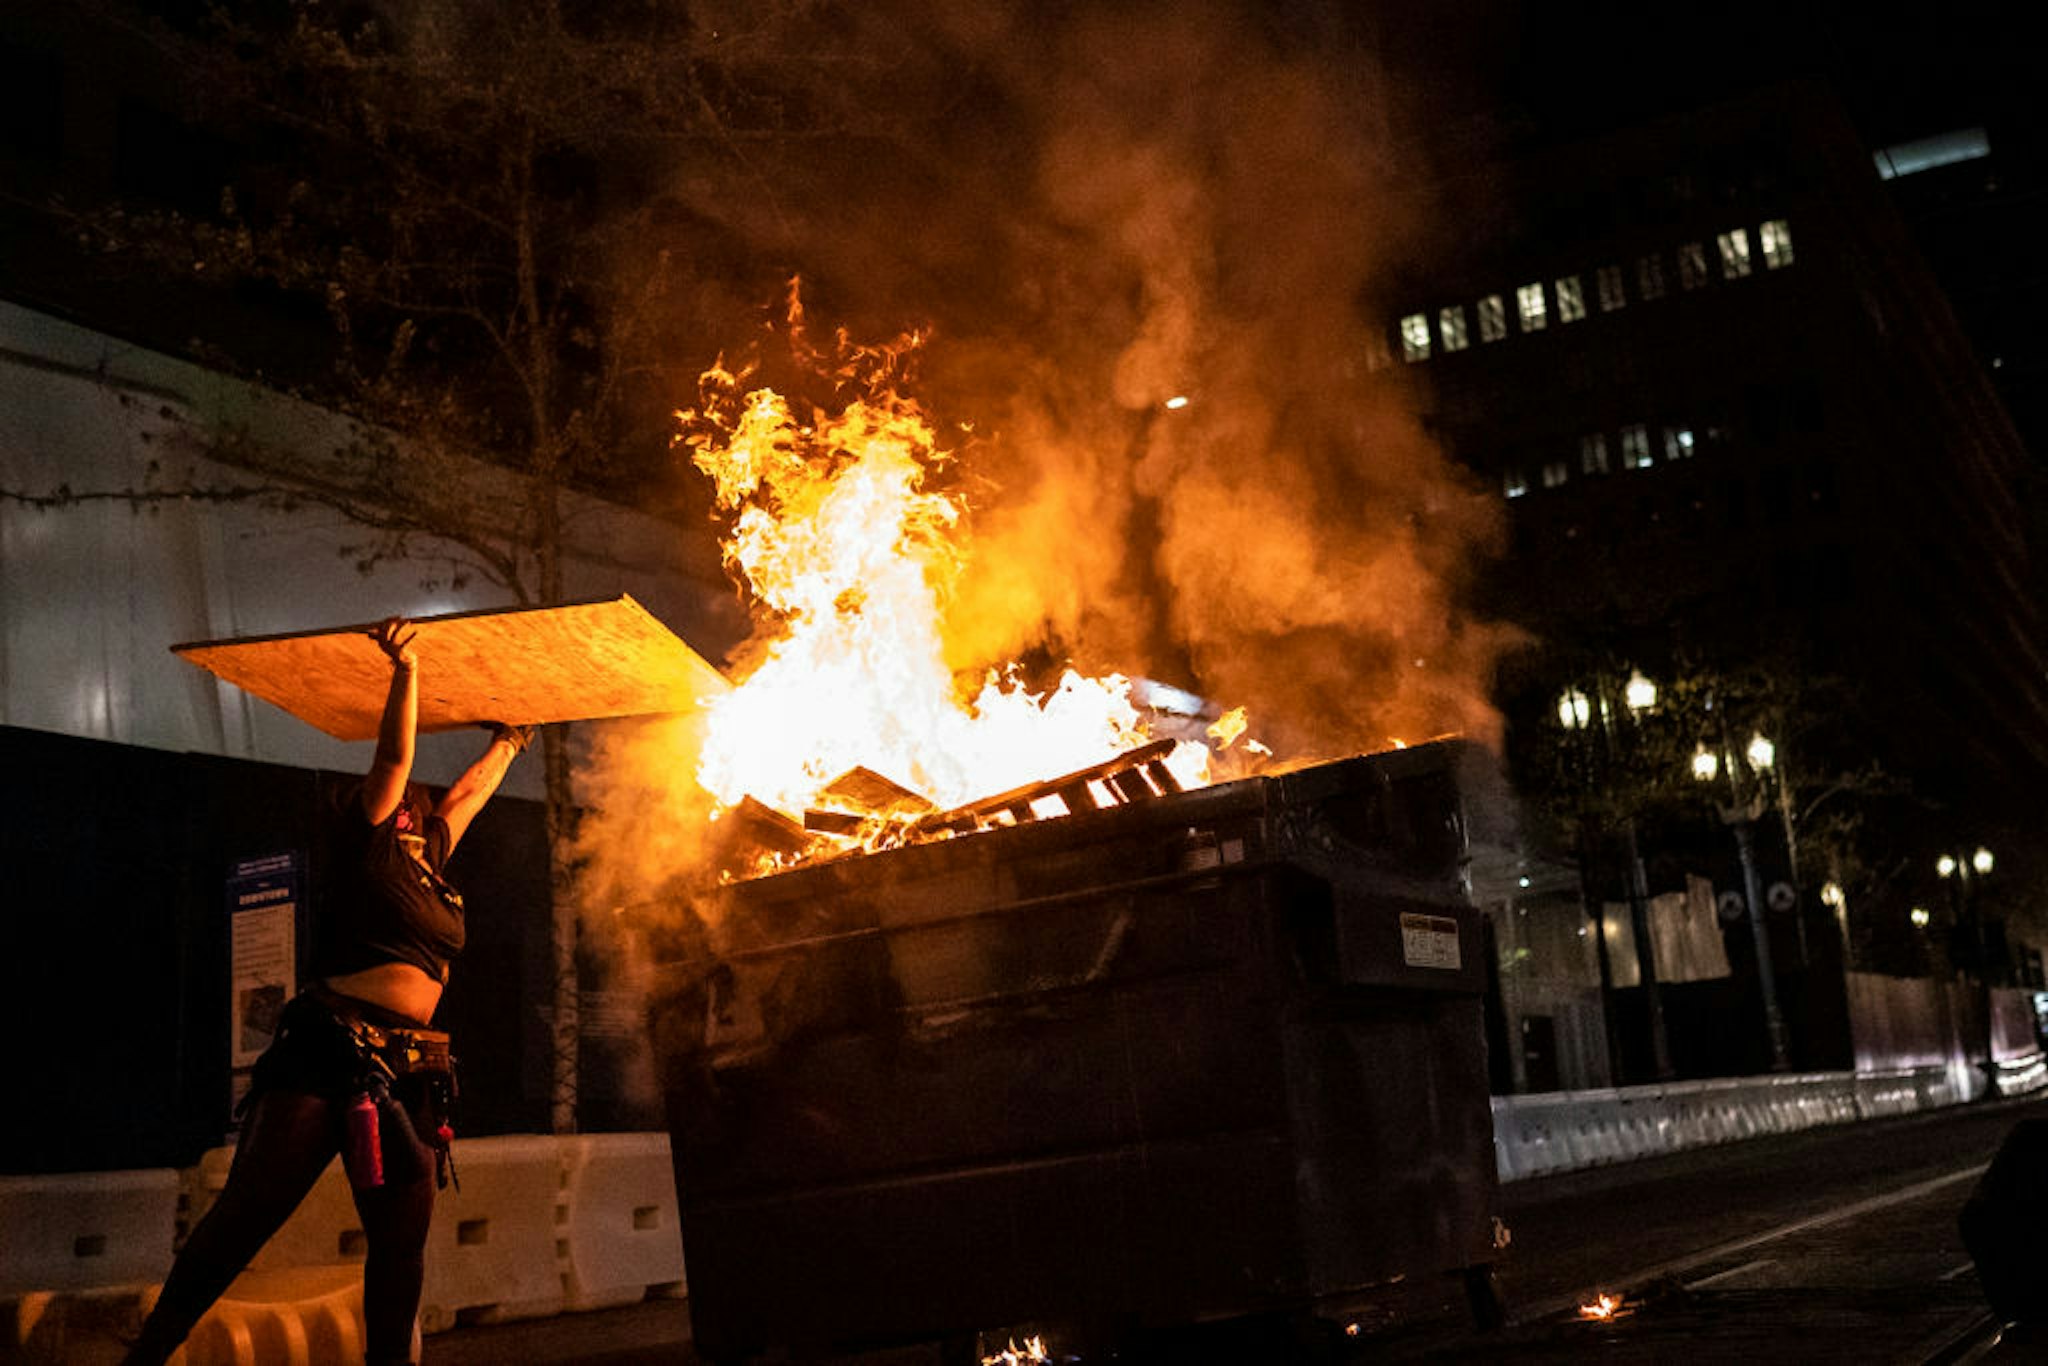 PORTLAND, OR - APRIL 16: A protester adds wood to a dumpster fire on April 16, 2021 in Portland, Oregon. Protests erupted Friday after Portland Police shot and killed a homeless man in Lents Park.